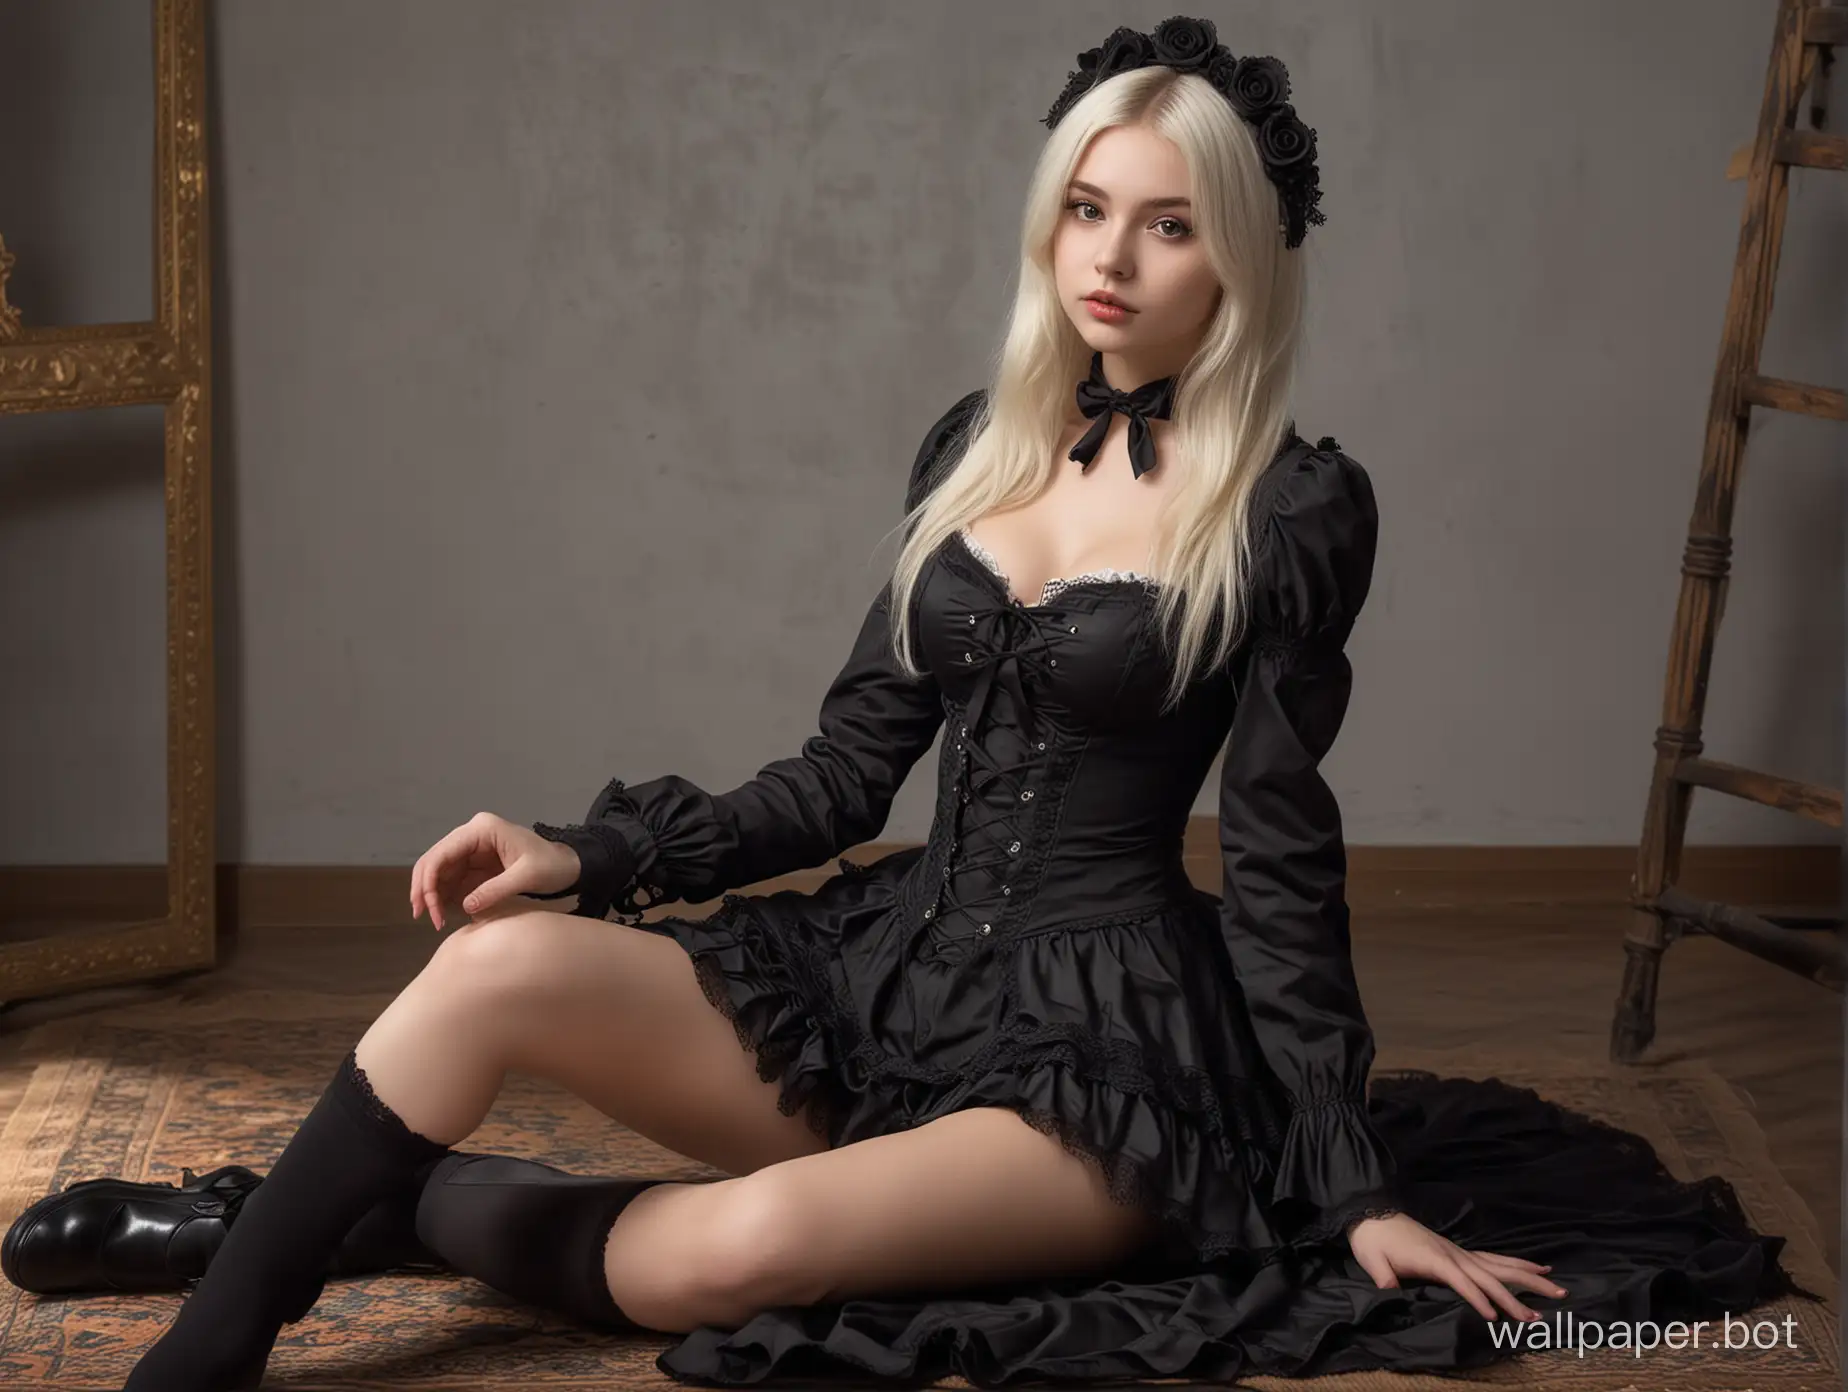 Stunning-Russian-Model-in-Gothic-Lolita-Costume-Captivating-Pose-in-High-Contrast-4K-HDR